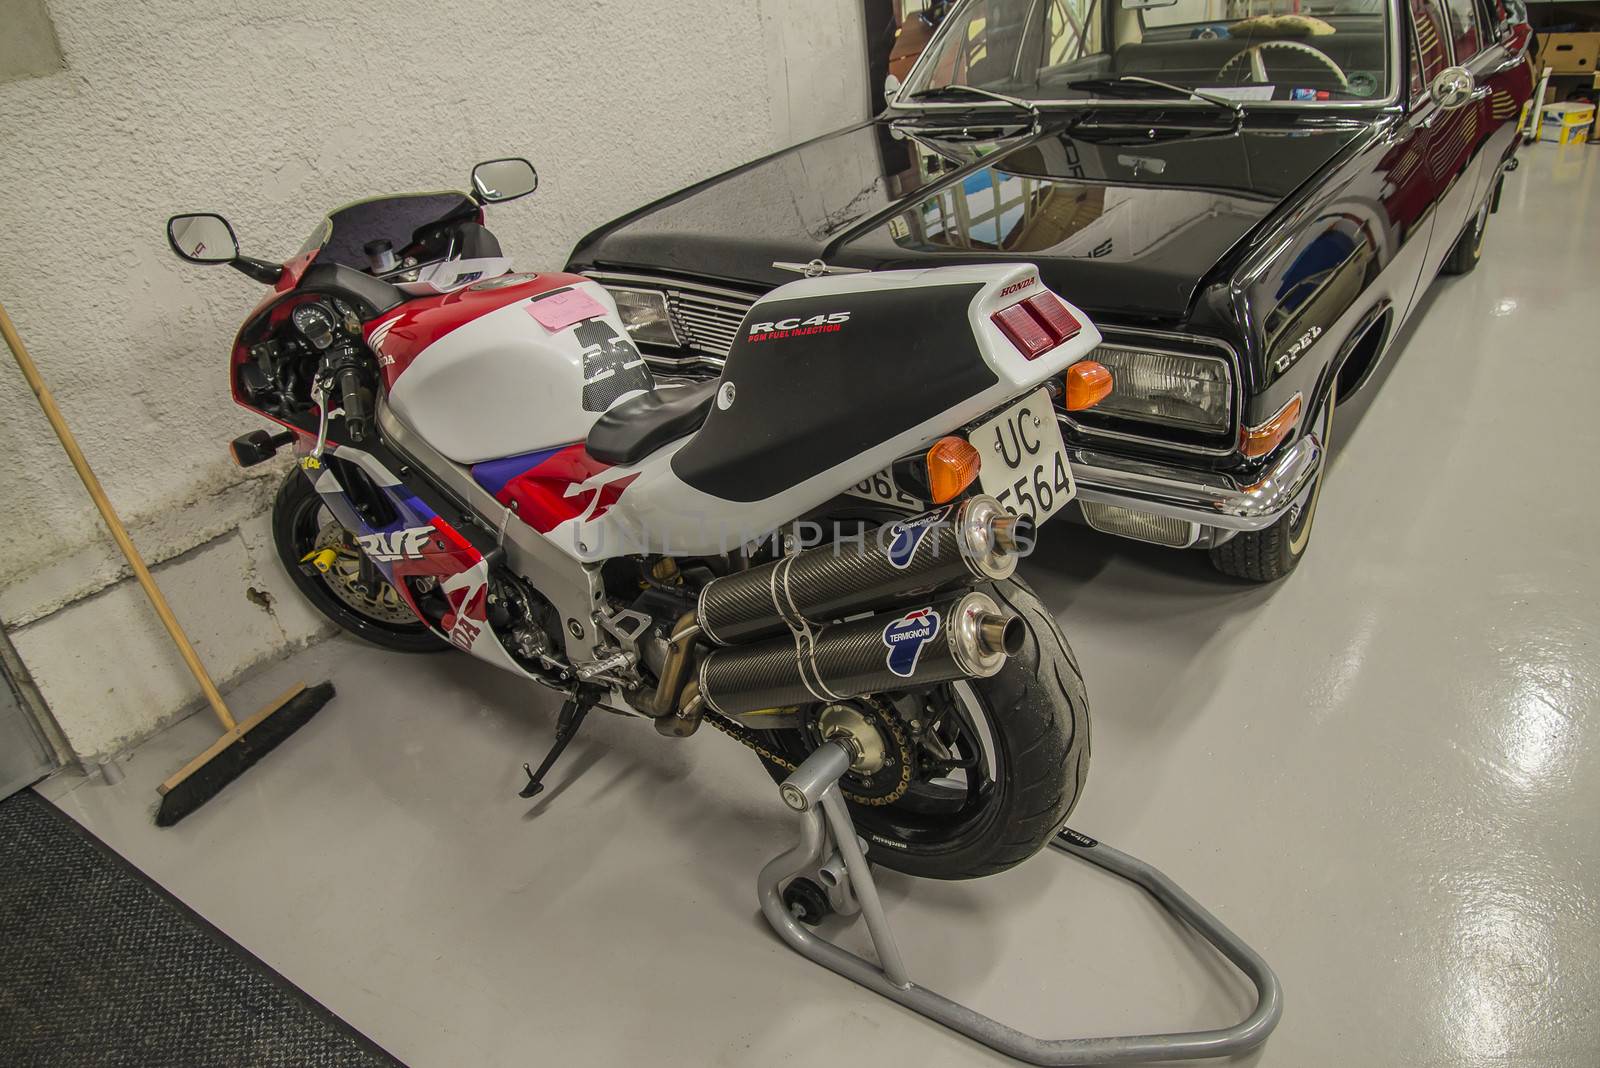 racing motorcycles in a garage by steirus